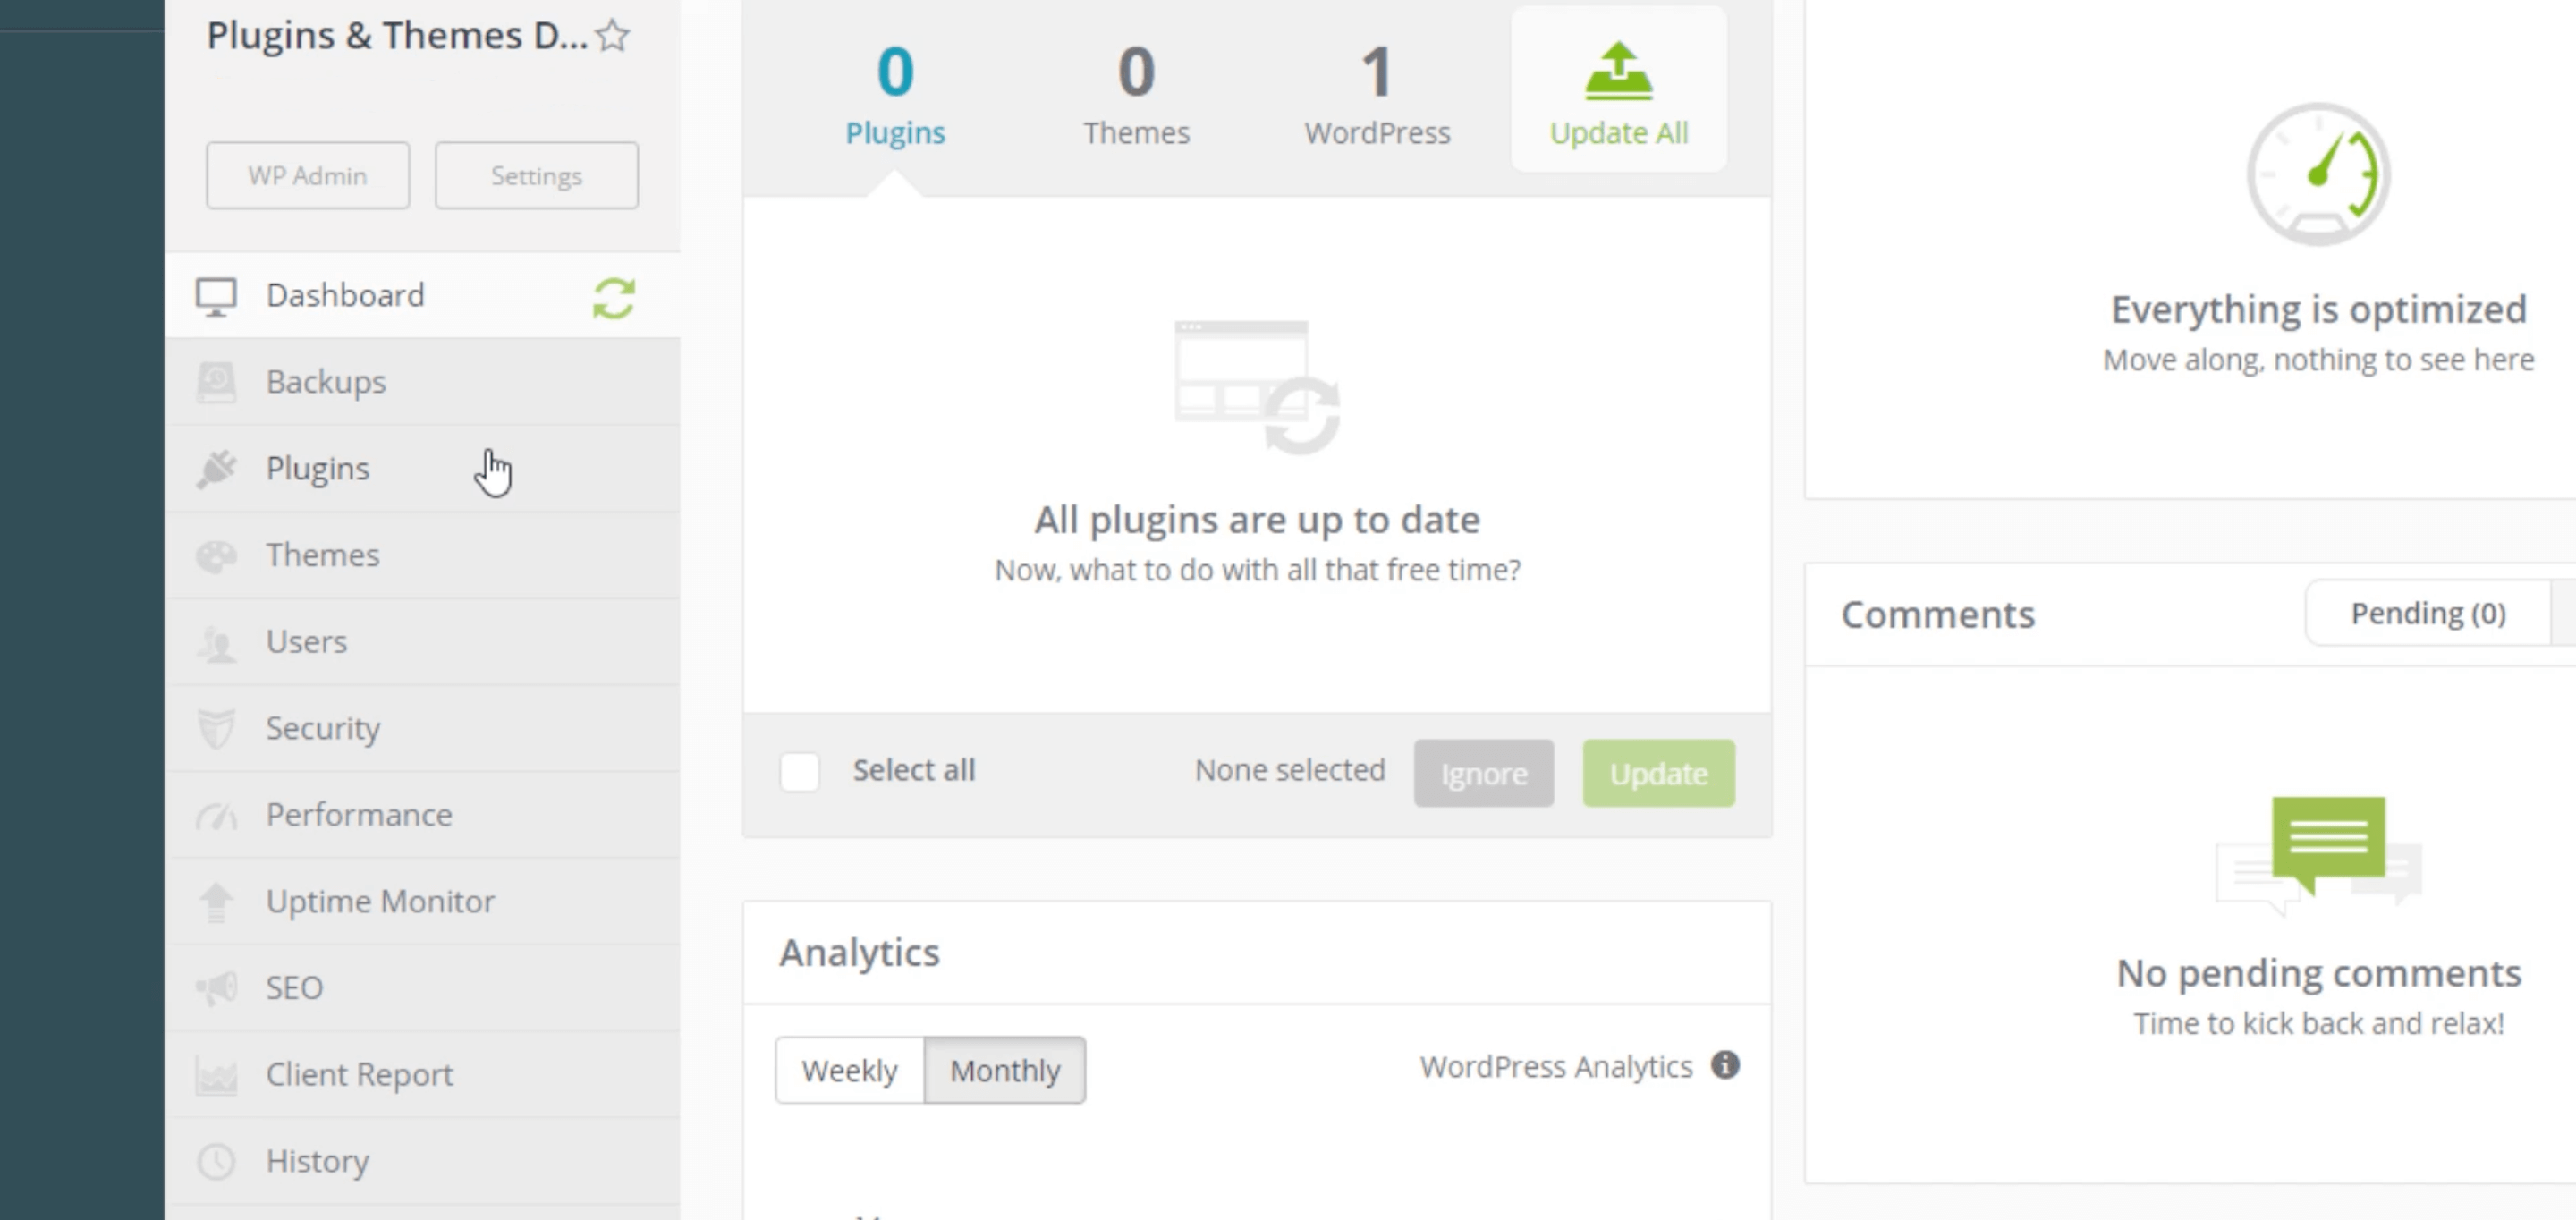 The ManageWP plugin and theme update dashboard.